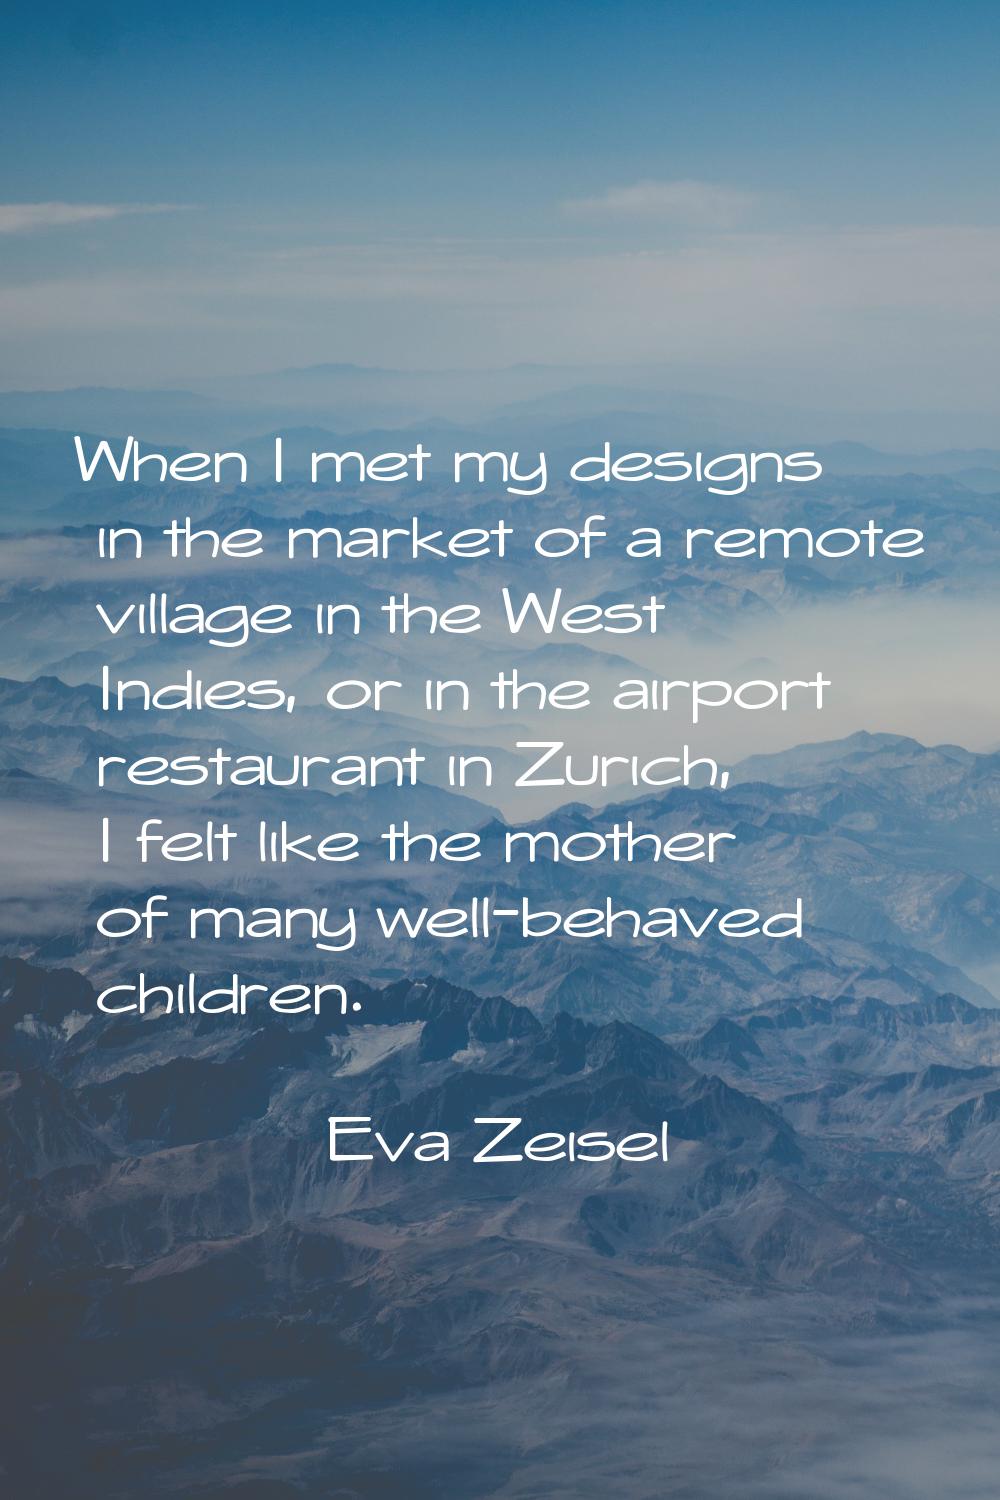 When I met my designs in the market of a remote village in the West Indies, or in the airport resta